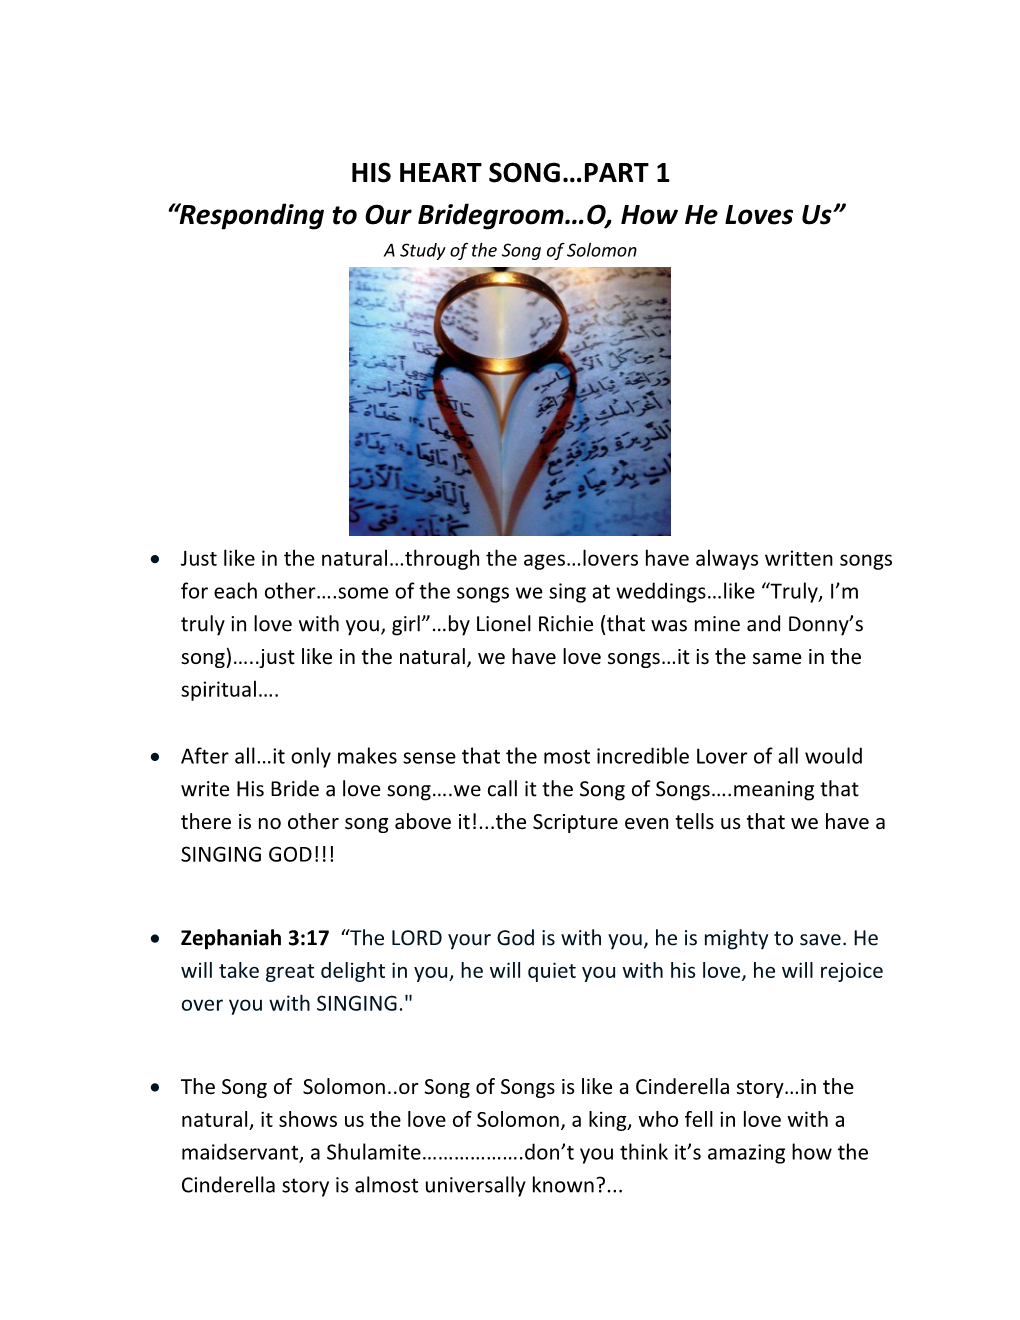 His Heart Song Part 1